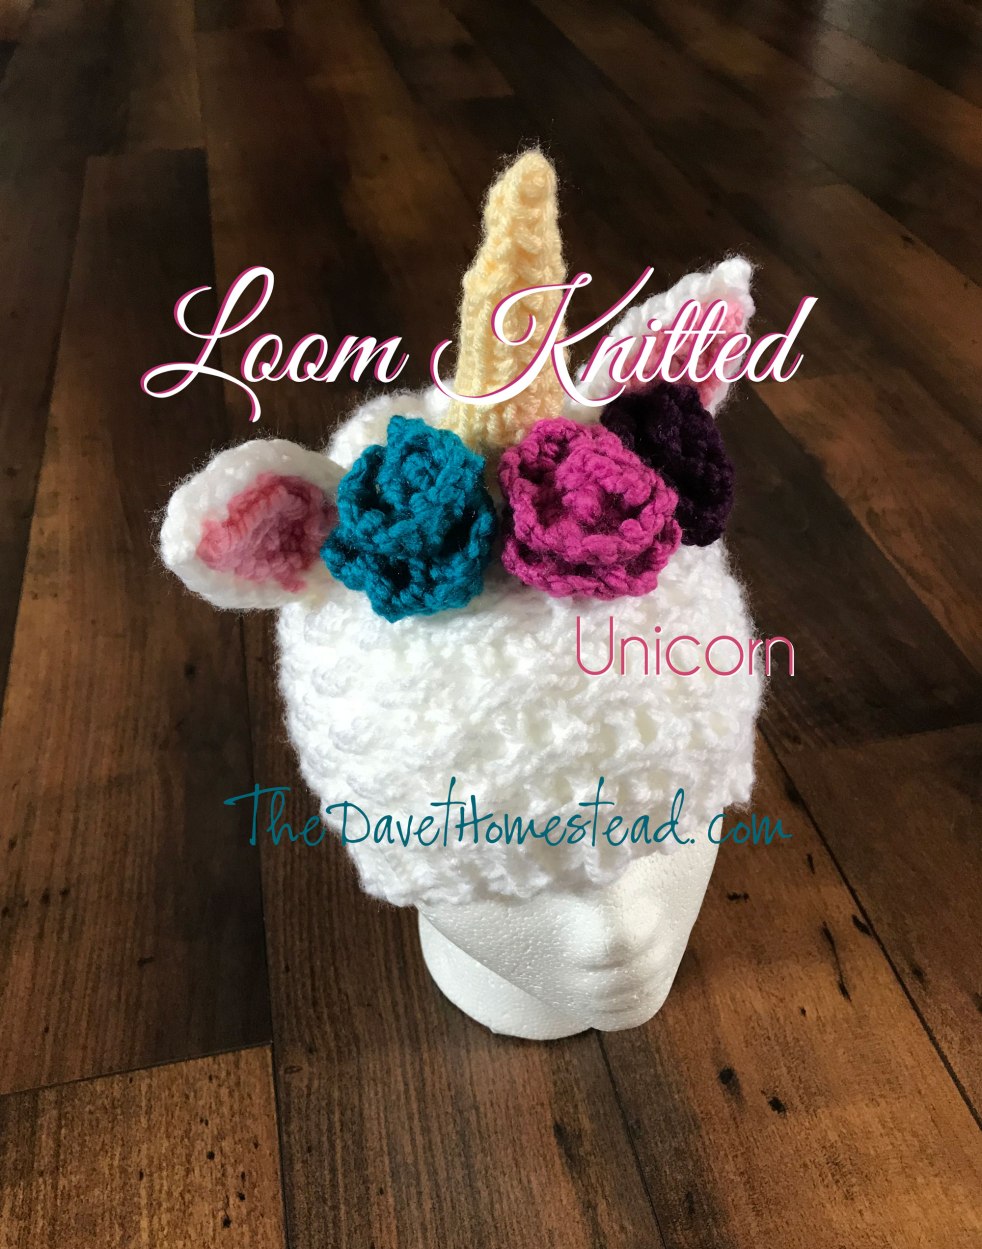 Loom Knitted Unicorn Hat with flowers